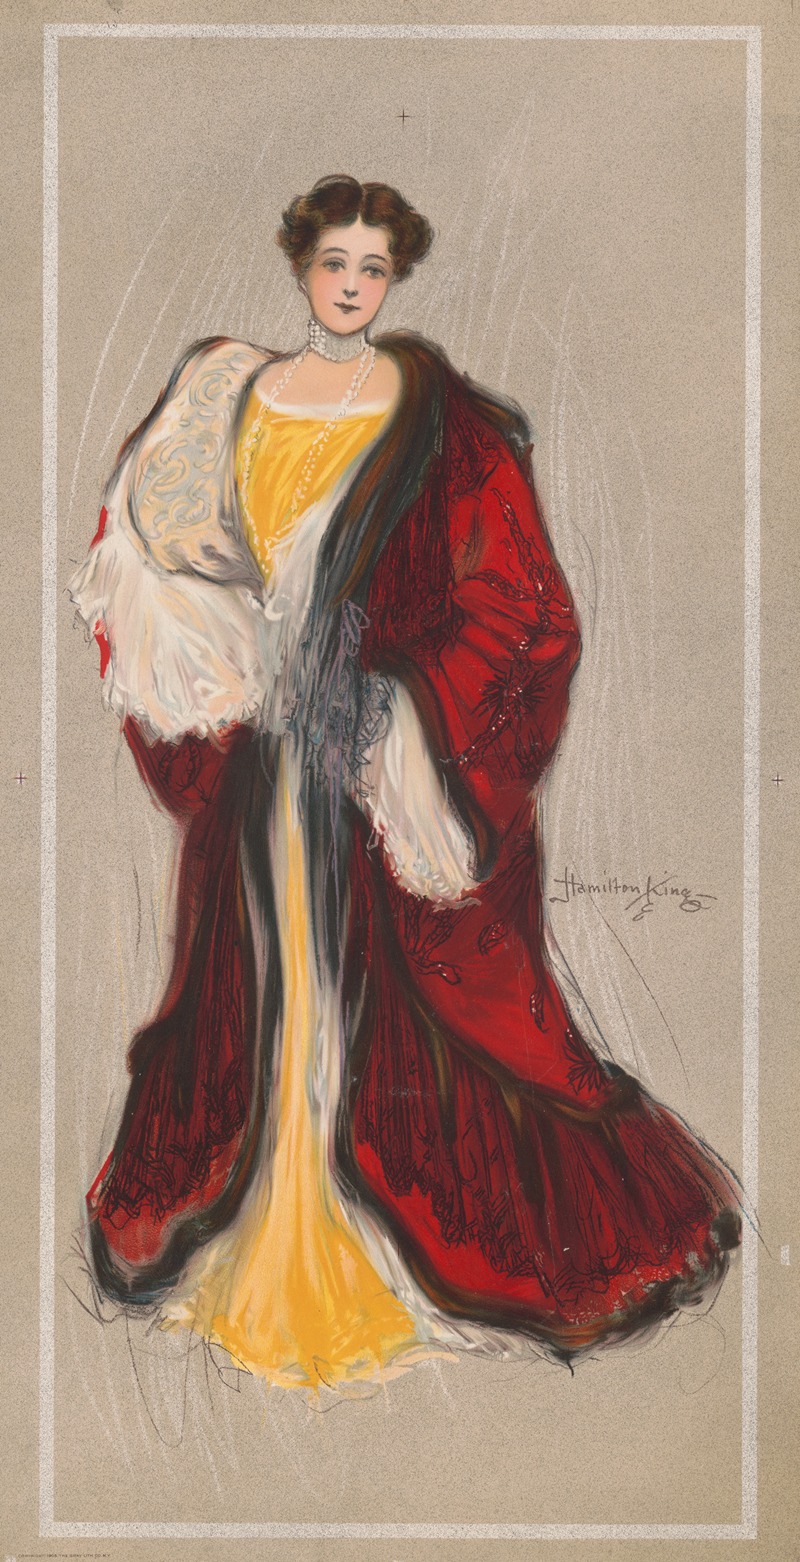 Hamilton King - Woman with yellow dress and red coat